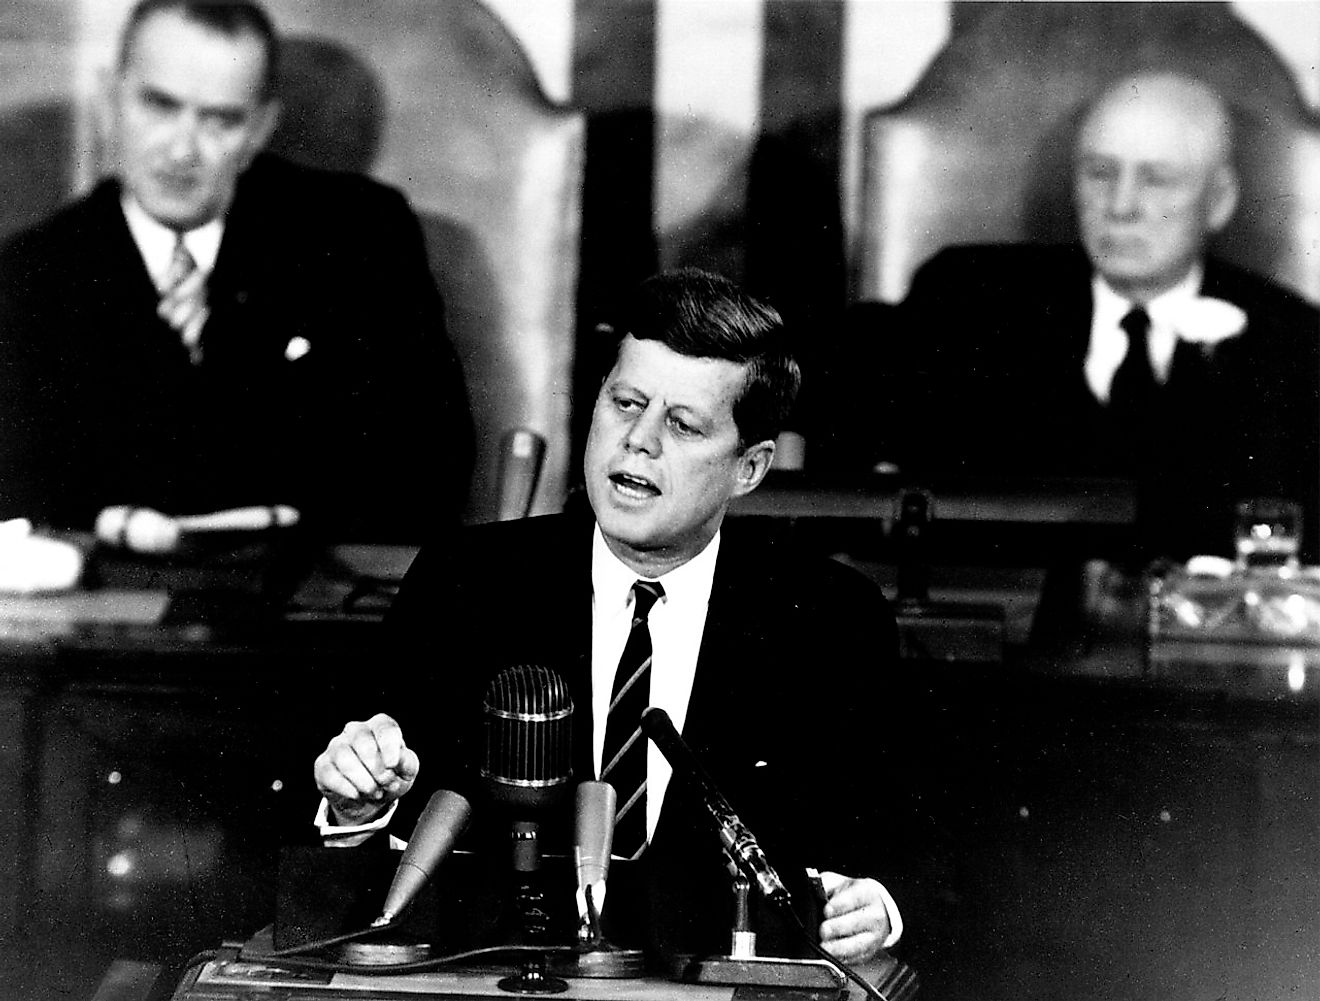 President John F. Kennedy delivering a historic message to a joint session of the Congress, on May 25, 1961. Image credit: NASA/Public domain